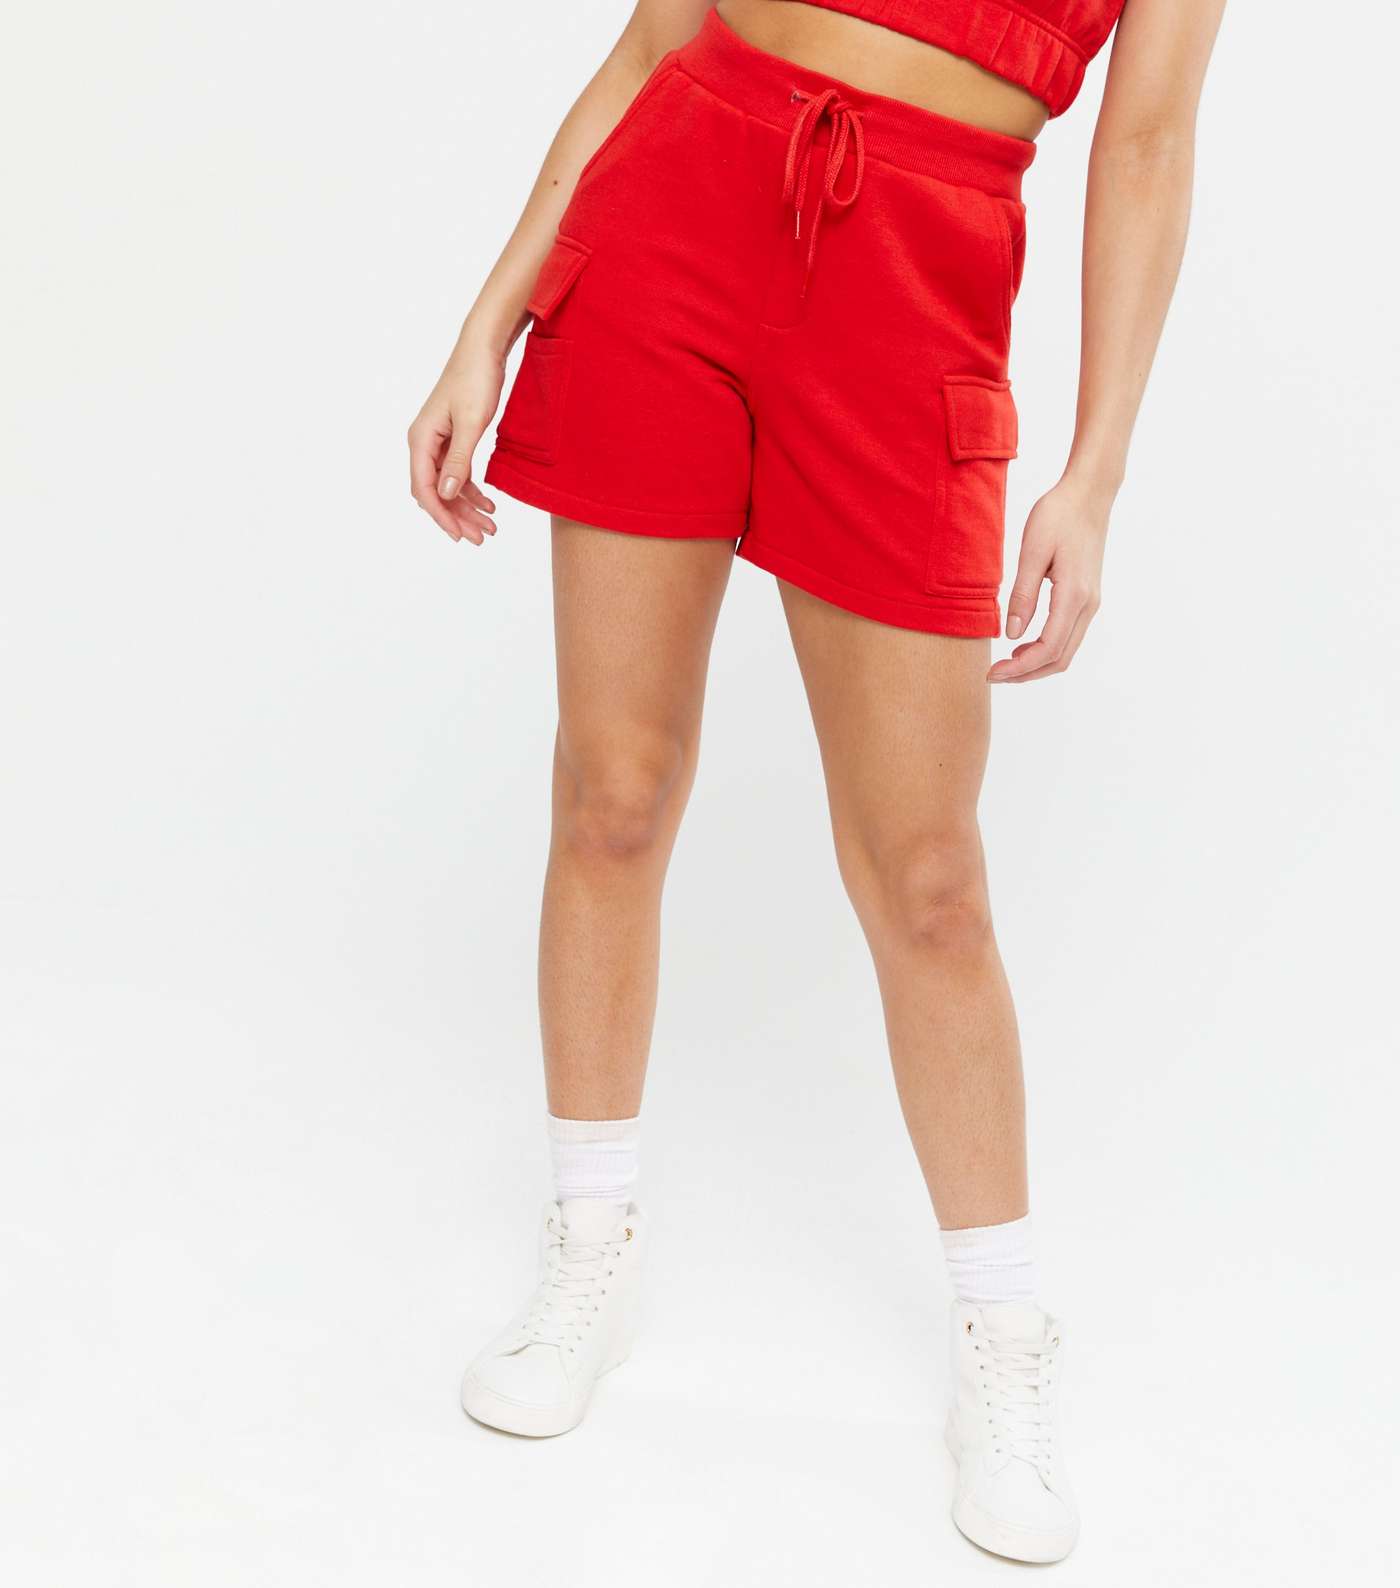 Cameo Rose Red Utility Crop Top and Shorts Set Image 3